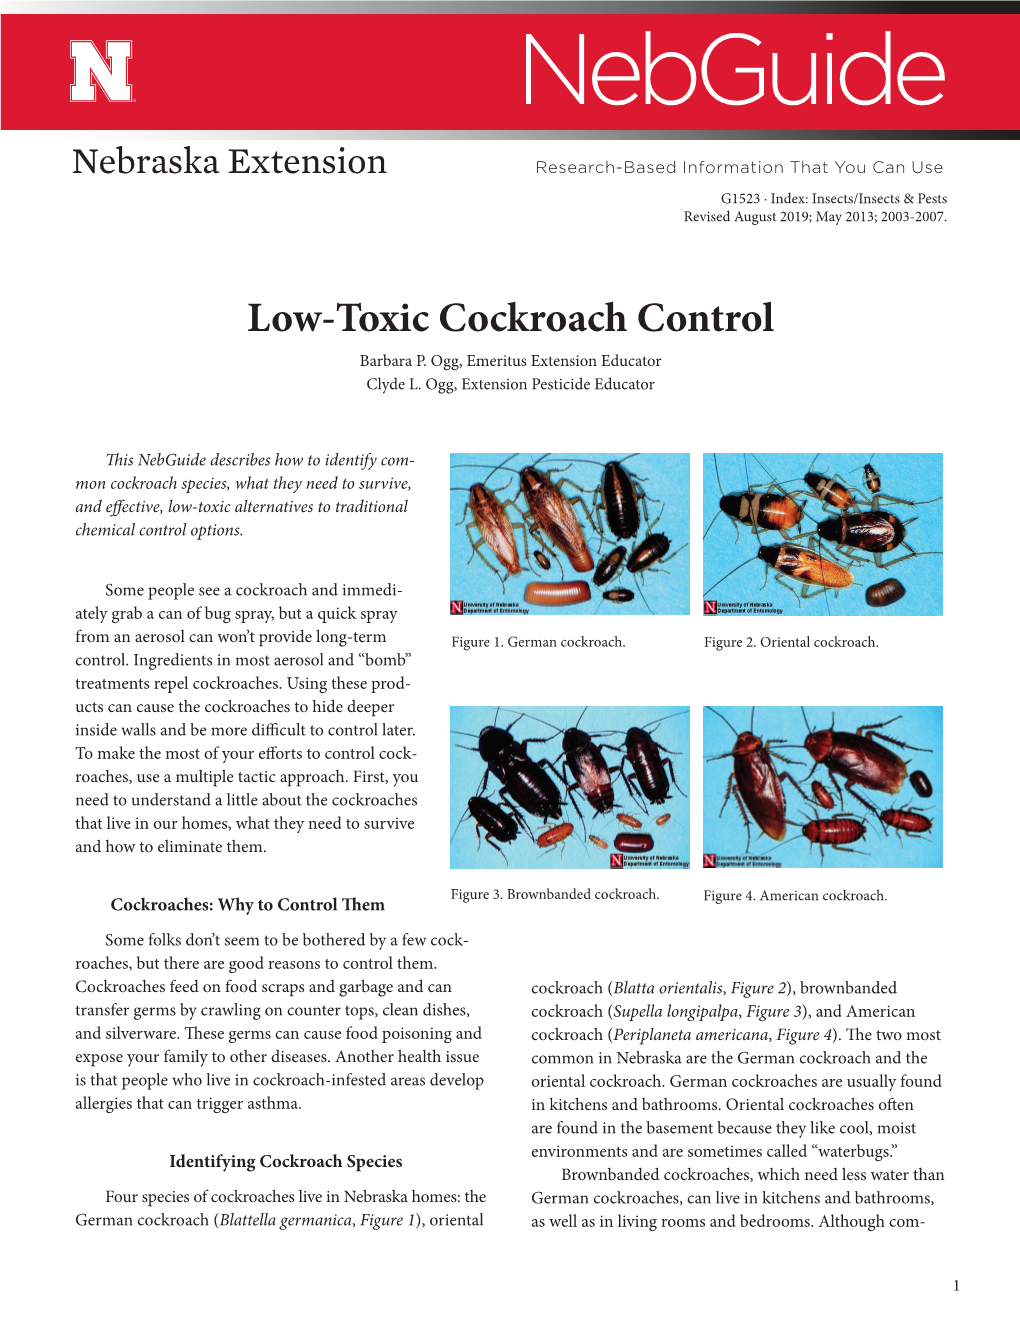 Low-Toxic Cockroach Control